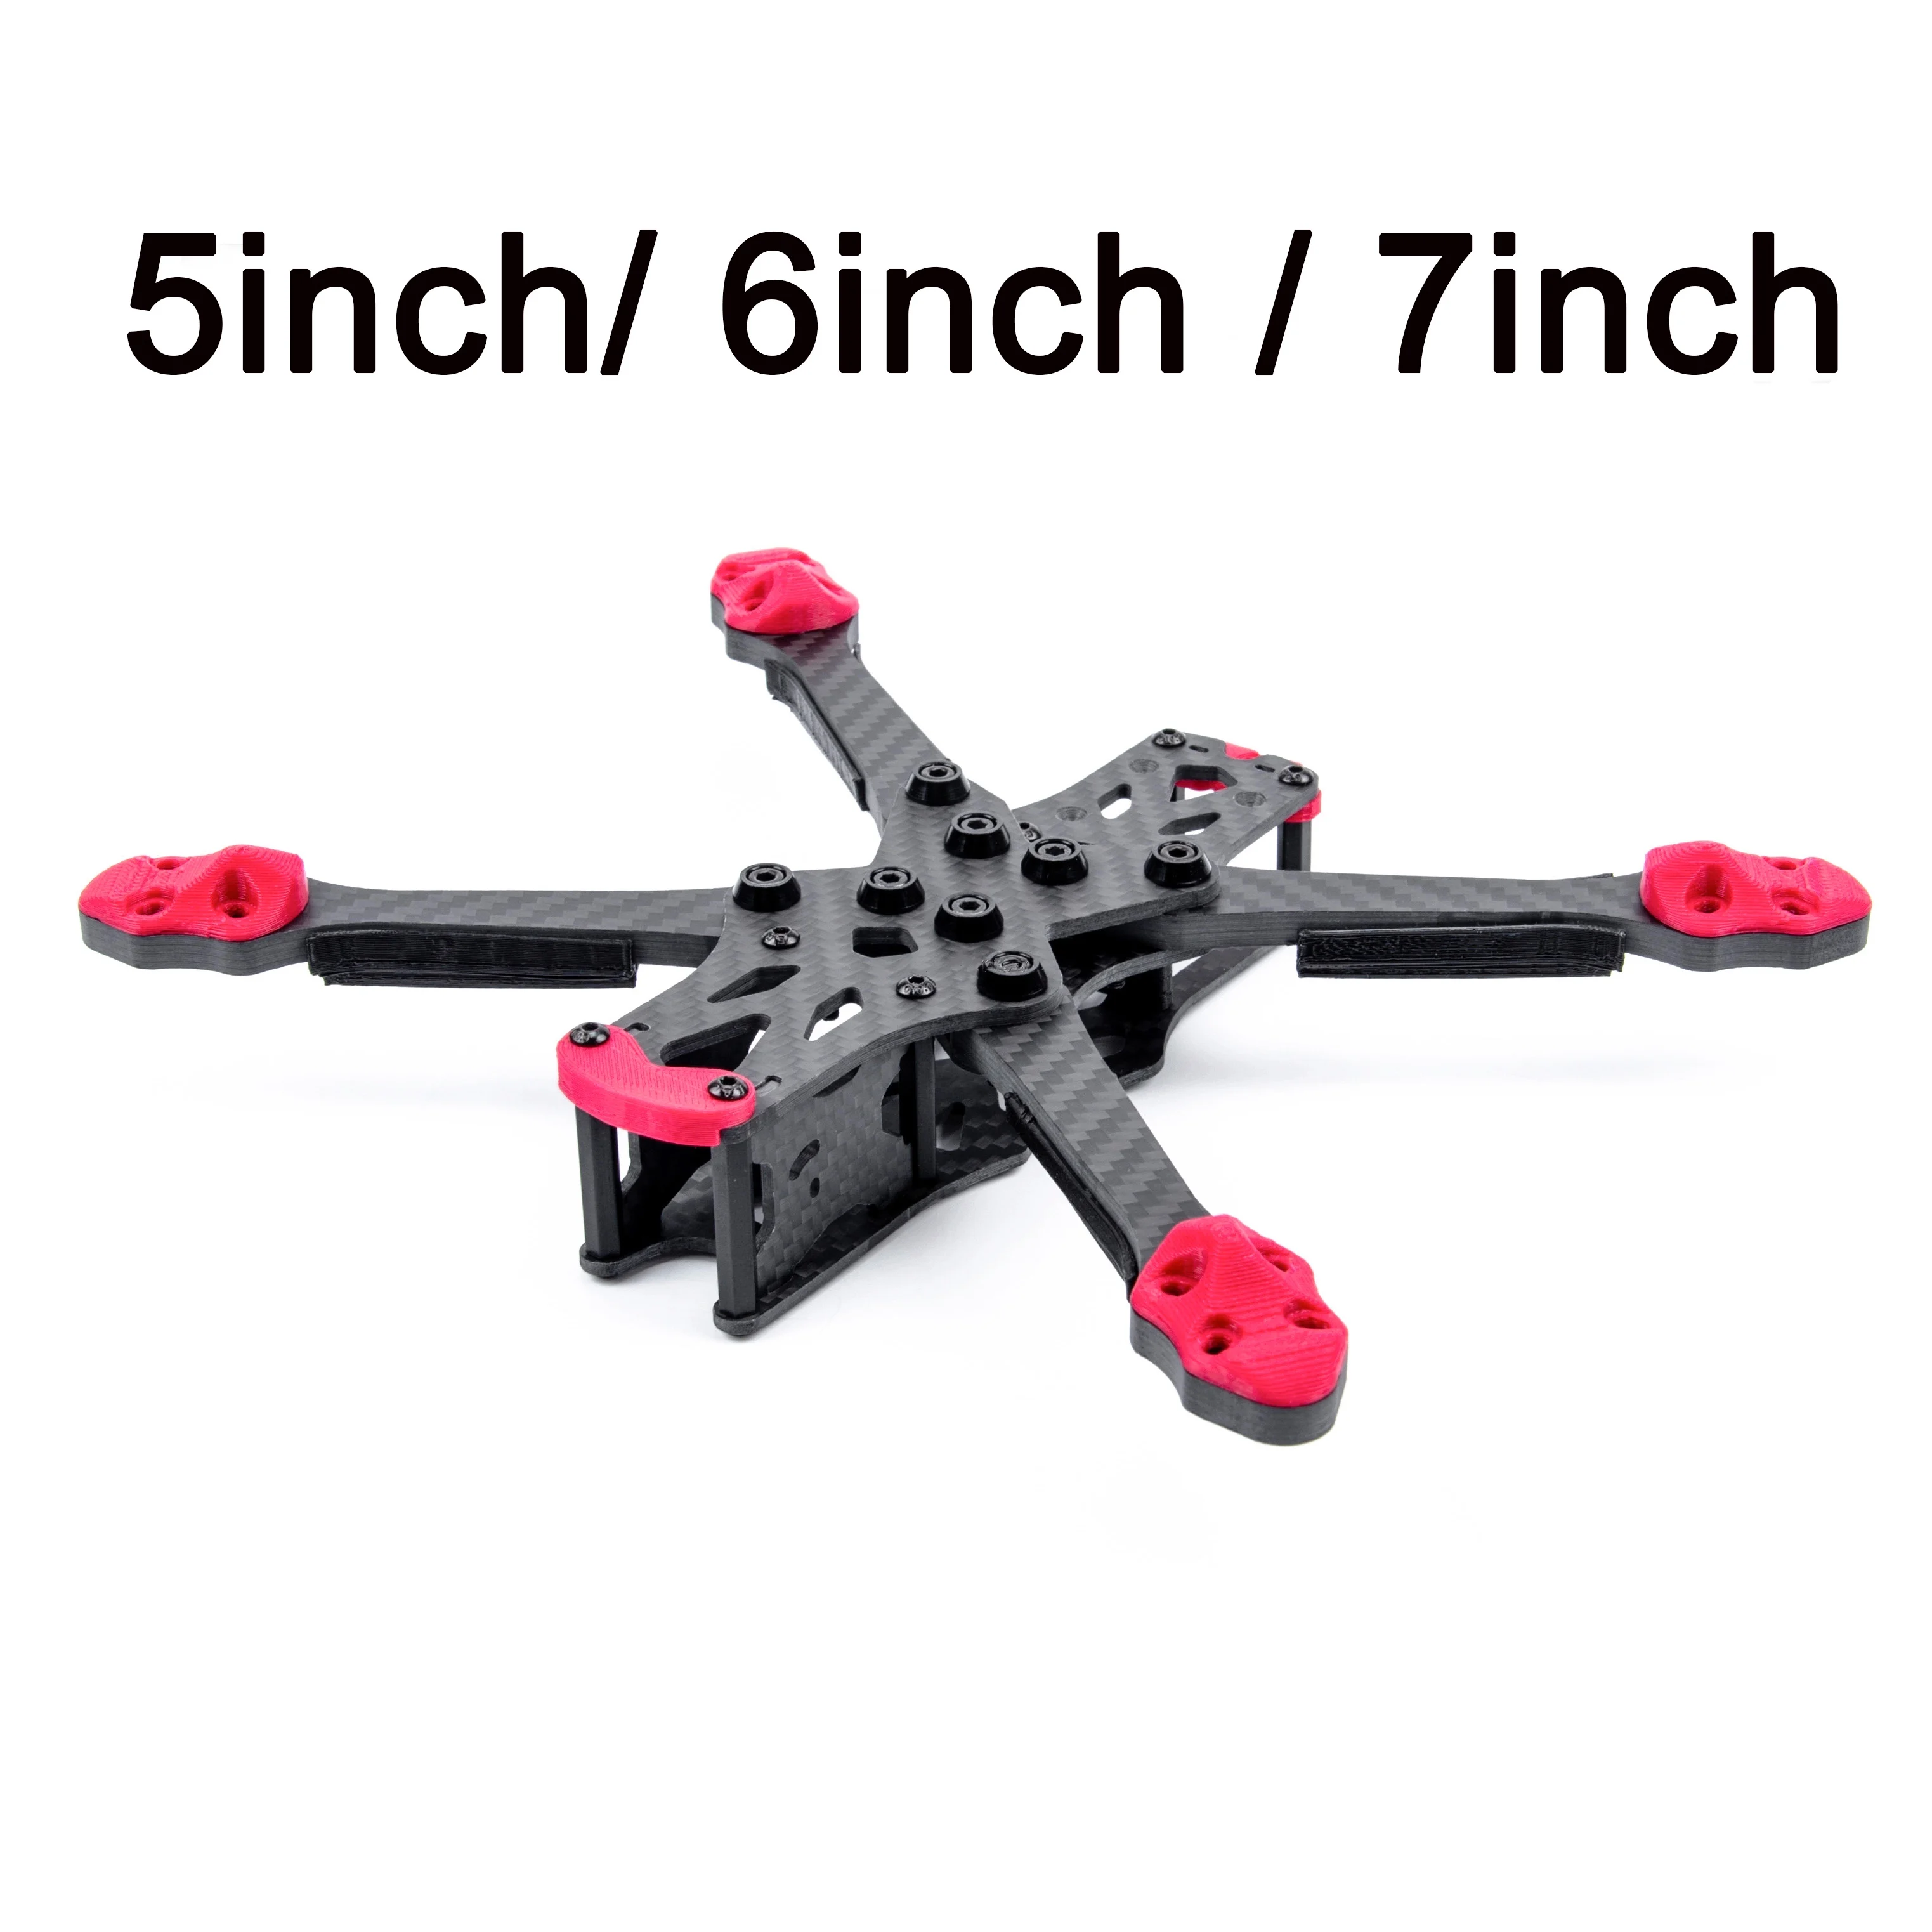 

NEW APEX 5inch 225mm / 6inch 260mm / 7inch 295mm Carbon Fiber Quadcopter Frame 5.5mm Arm Kit For FPV Freestyle RC Racing Drone